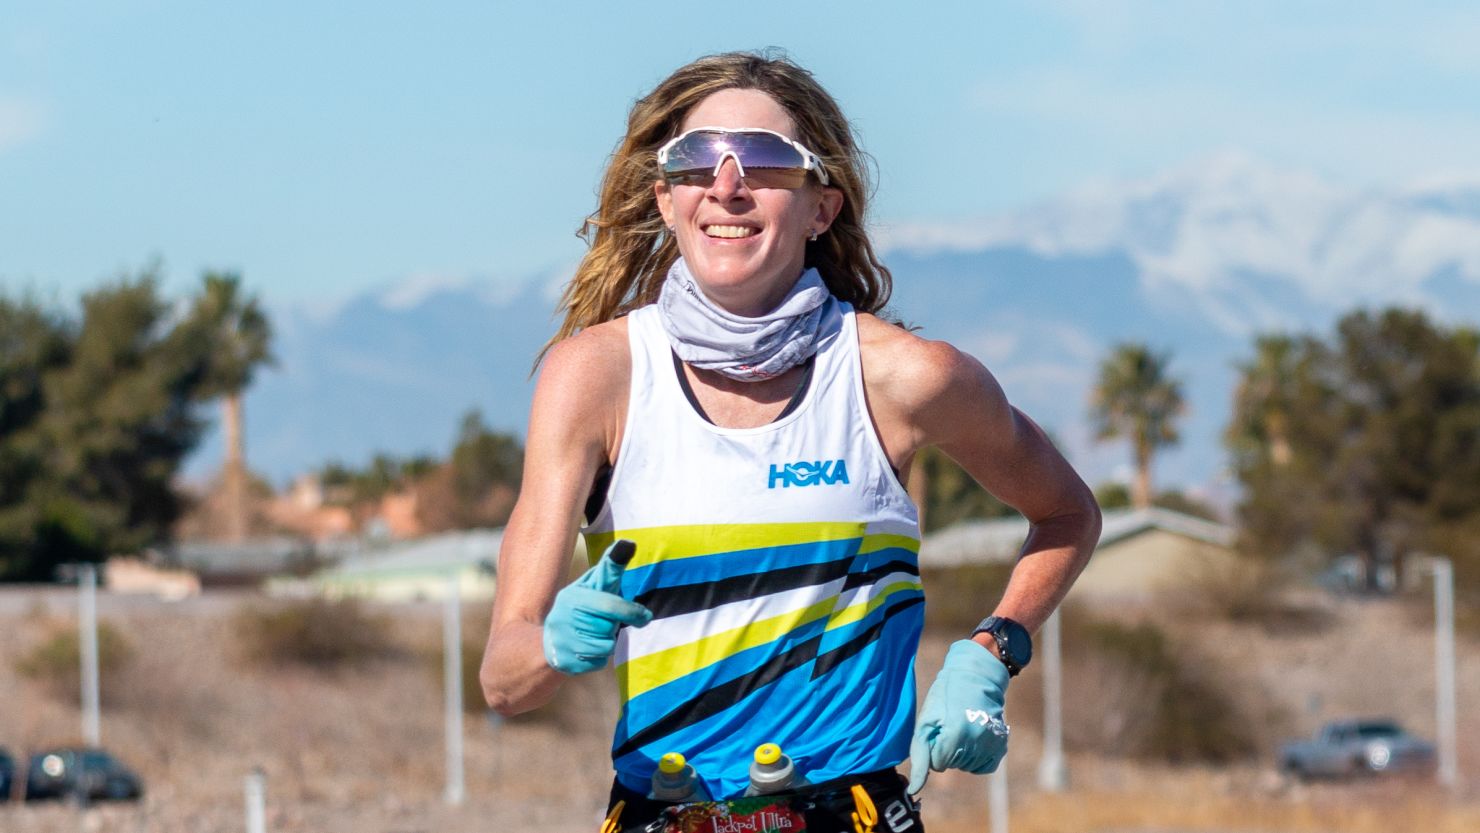 Camille Herron put her 'heart and soul' into breaking the 100-mile